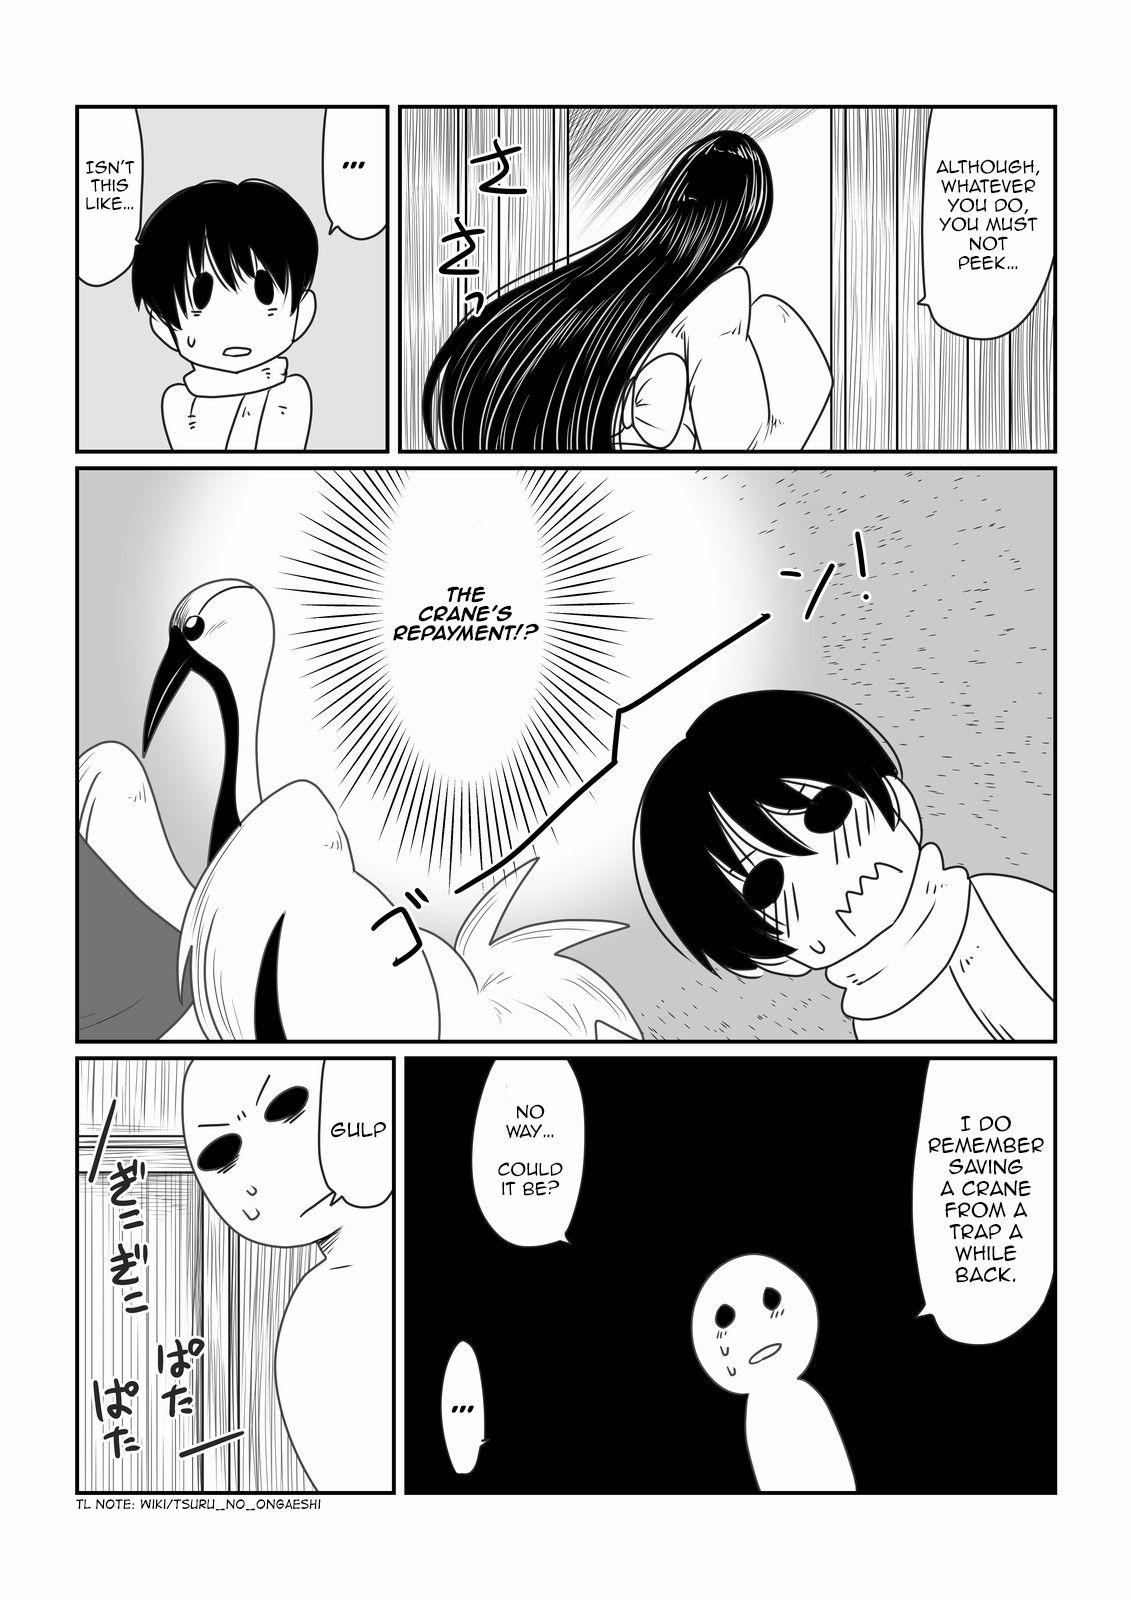 Hot Blow Jobs Kumo Onna-san no Ongaeshi. | The Spider Woman's Repayment. - Original Trap - Page 3